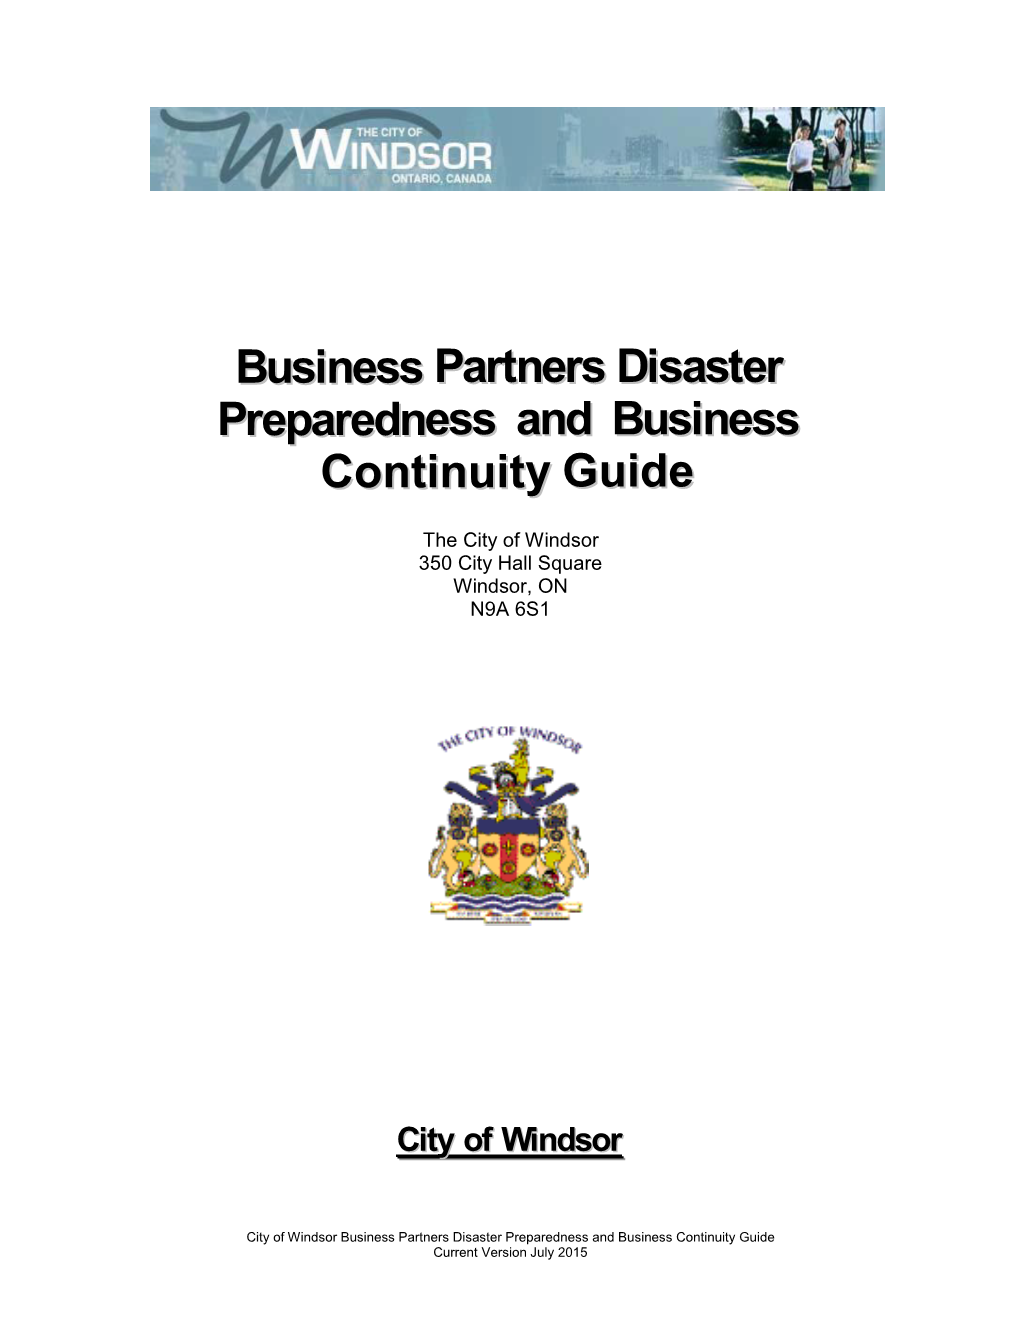 Disaster-Business-Continuity-Windsor